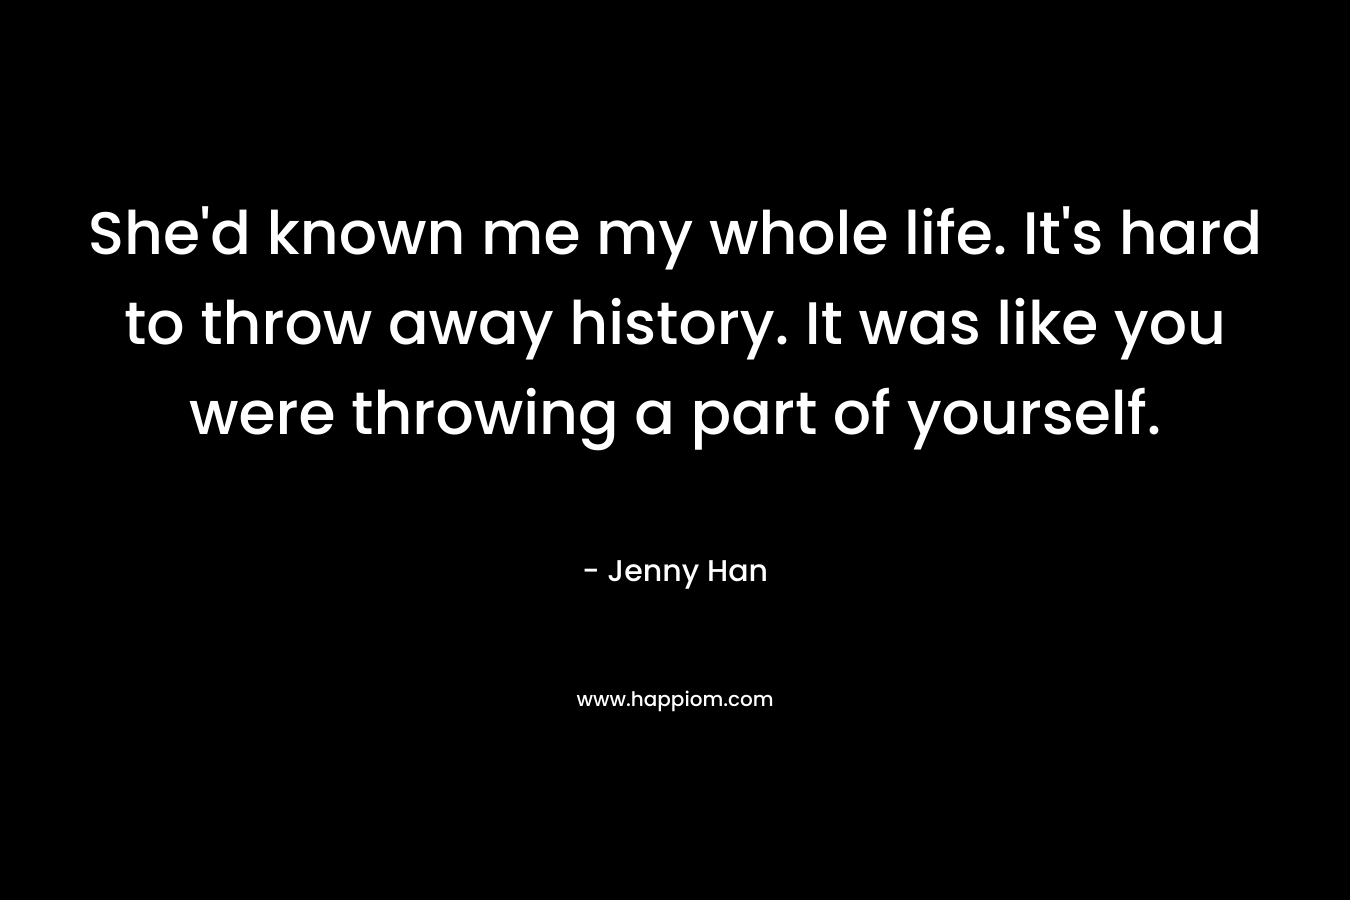 She’d known me my whole life. It’s hard to throw away history. It was like you were throwing a part of yourself. – Jenny Han